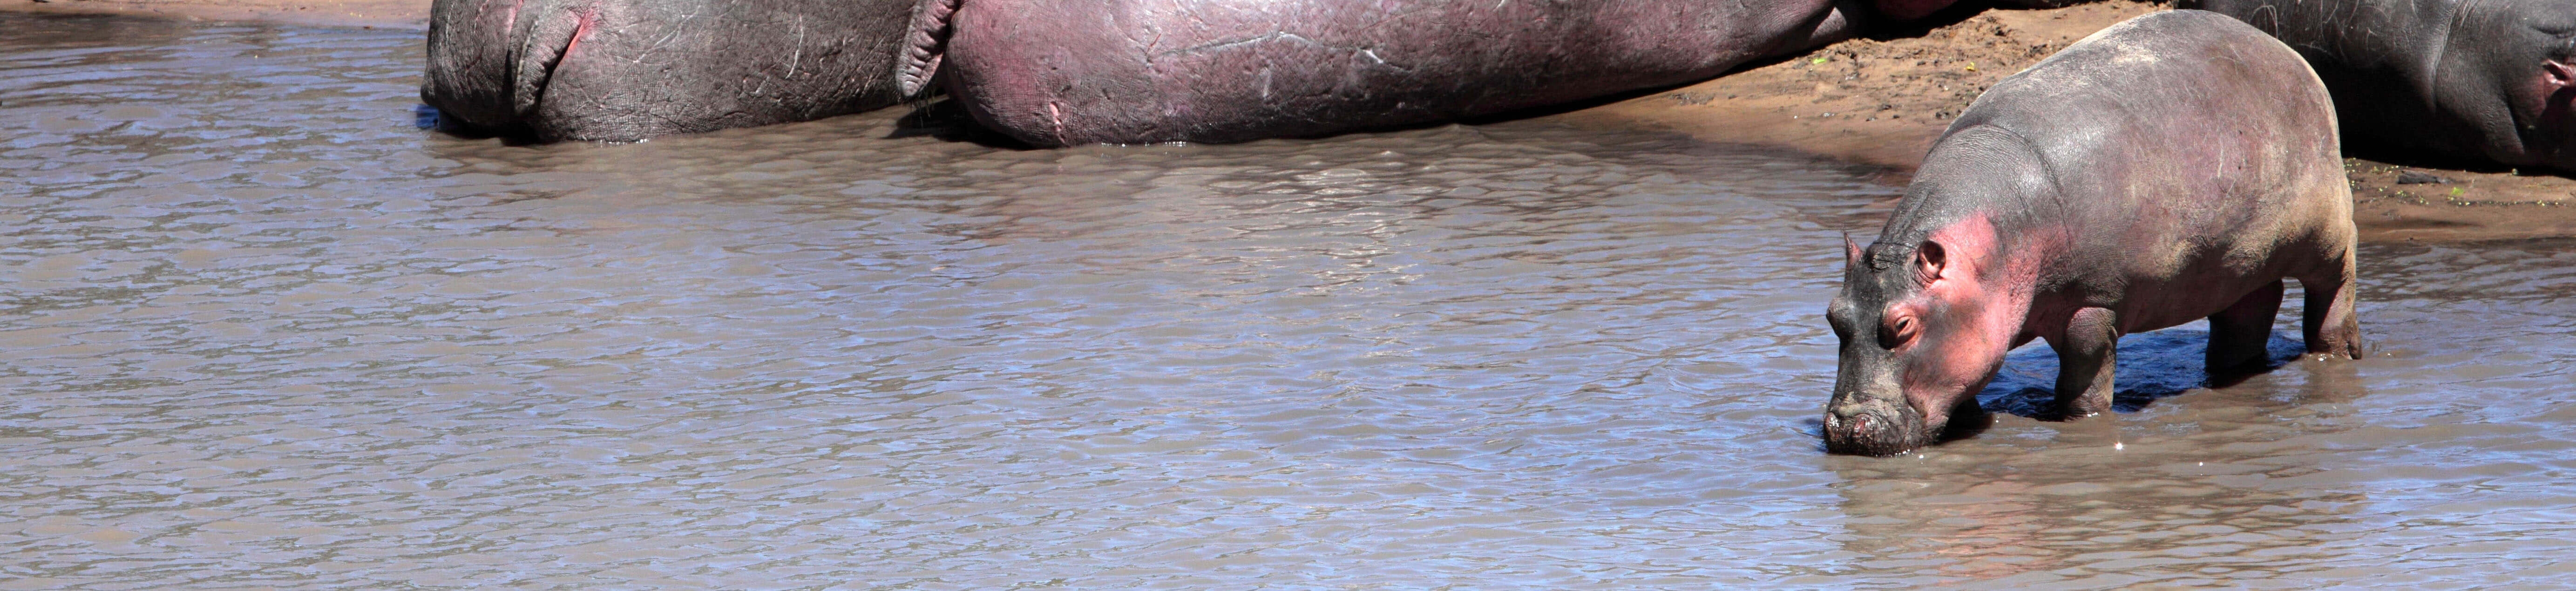 Baby hippo drinking water in Gorongosa, Mozambique